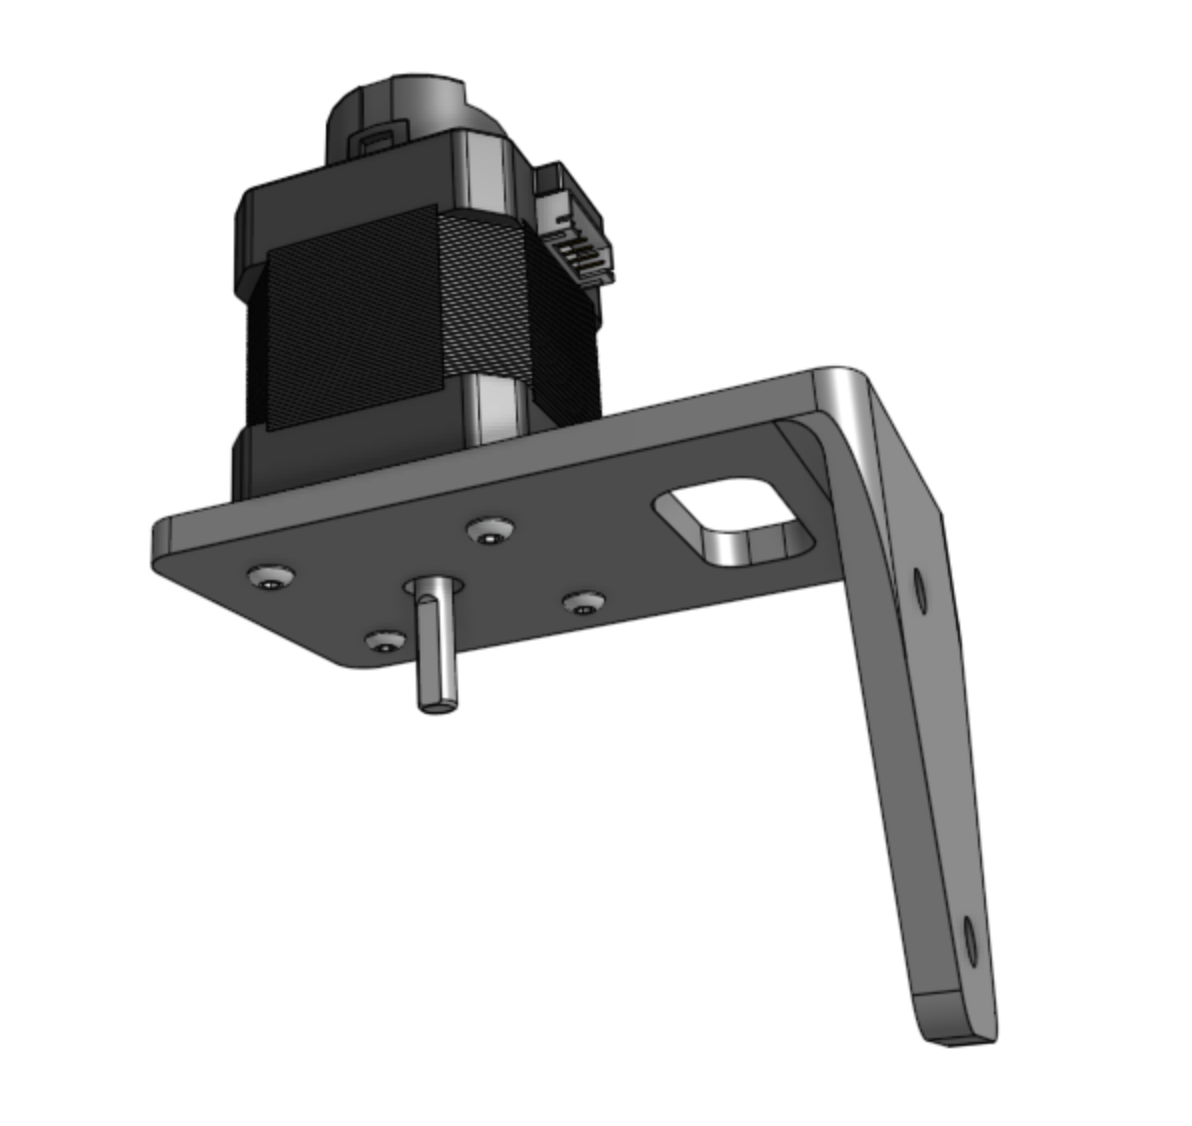 z-axis motor mount with motor